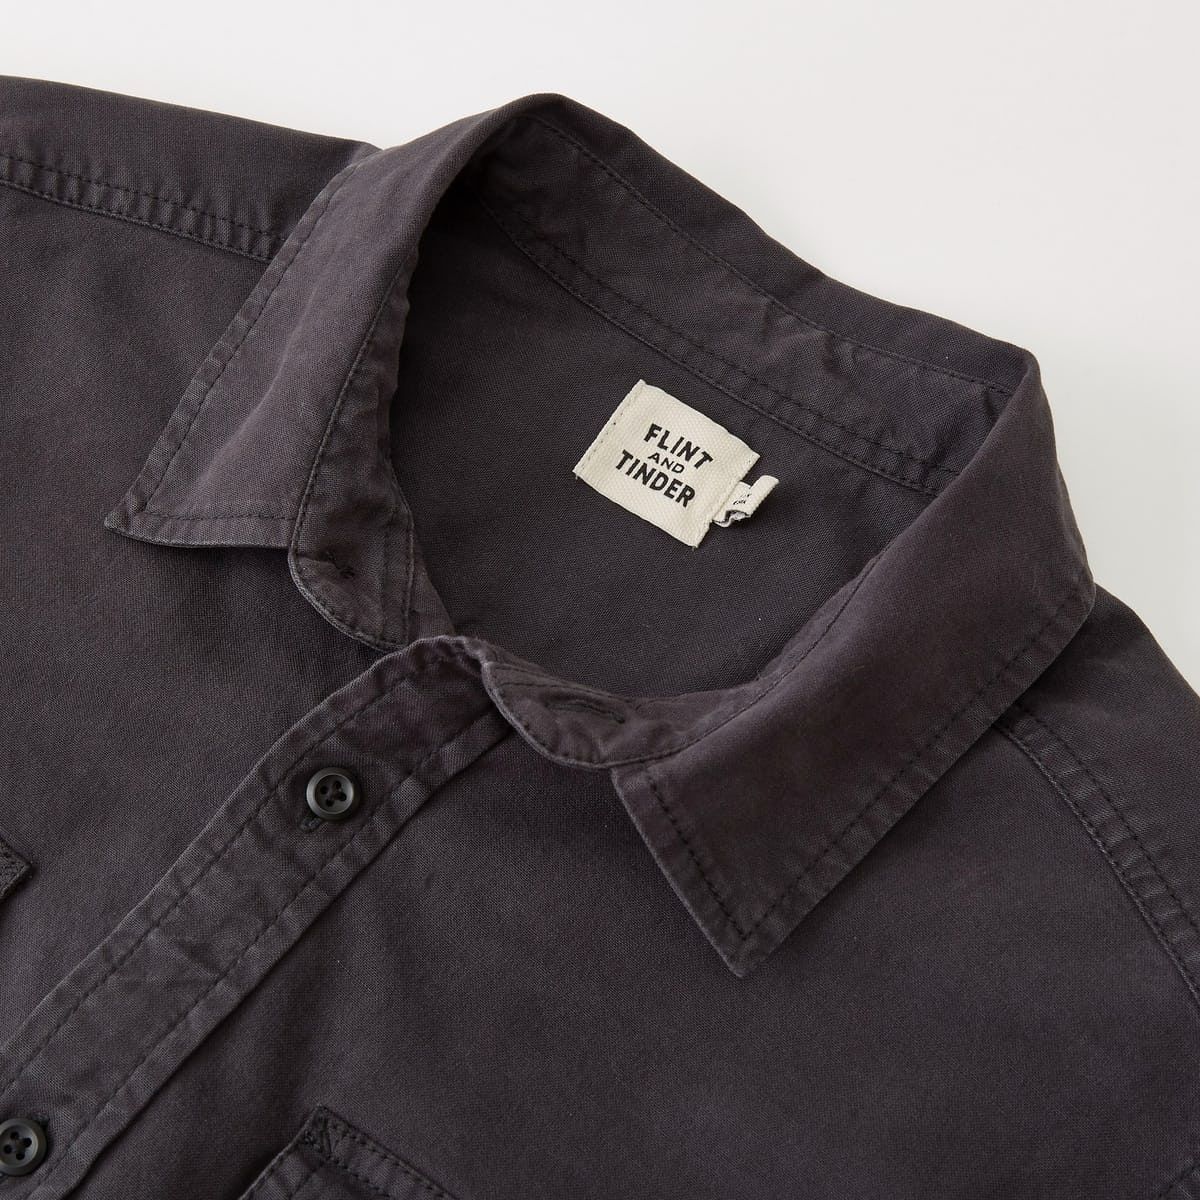 What We're Wearing: Flint And Tinder Expedition Shirt